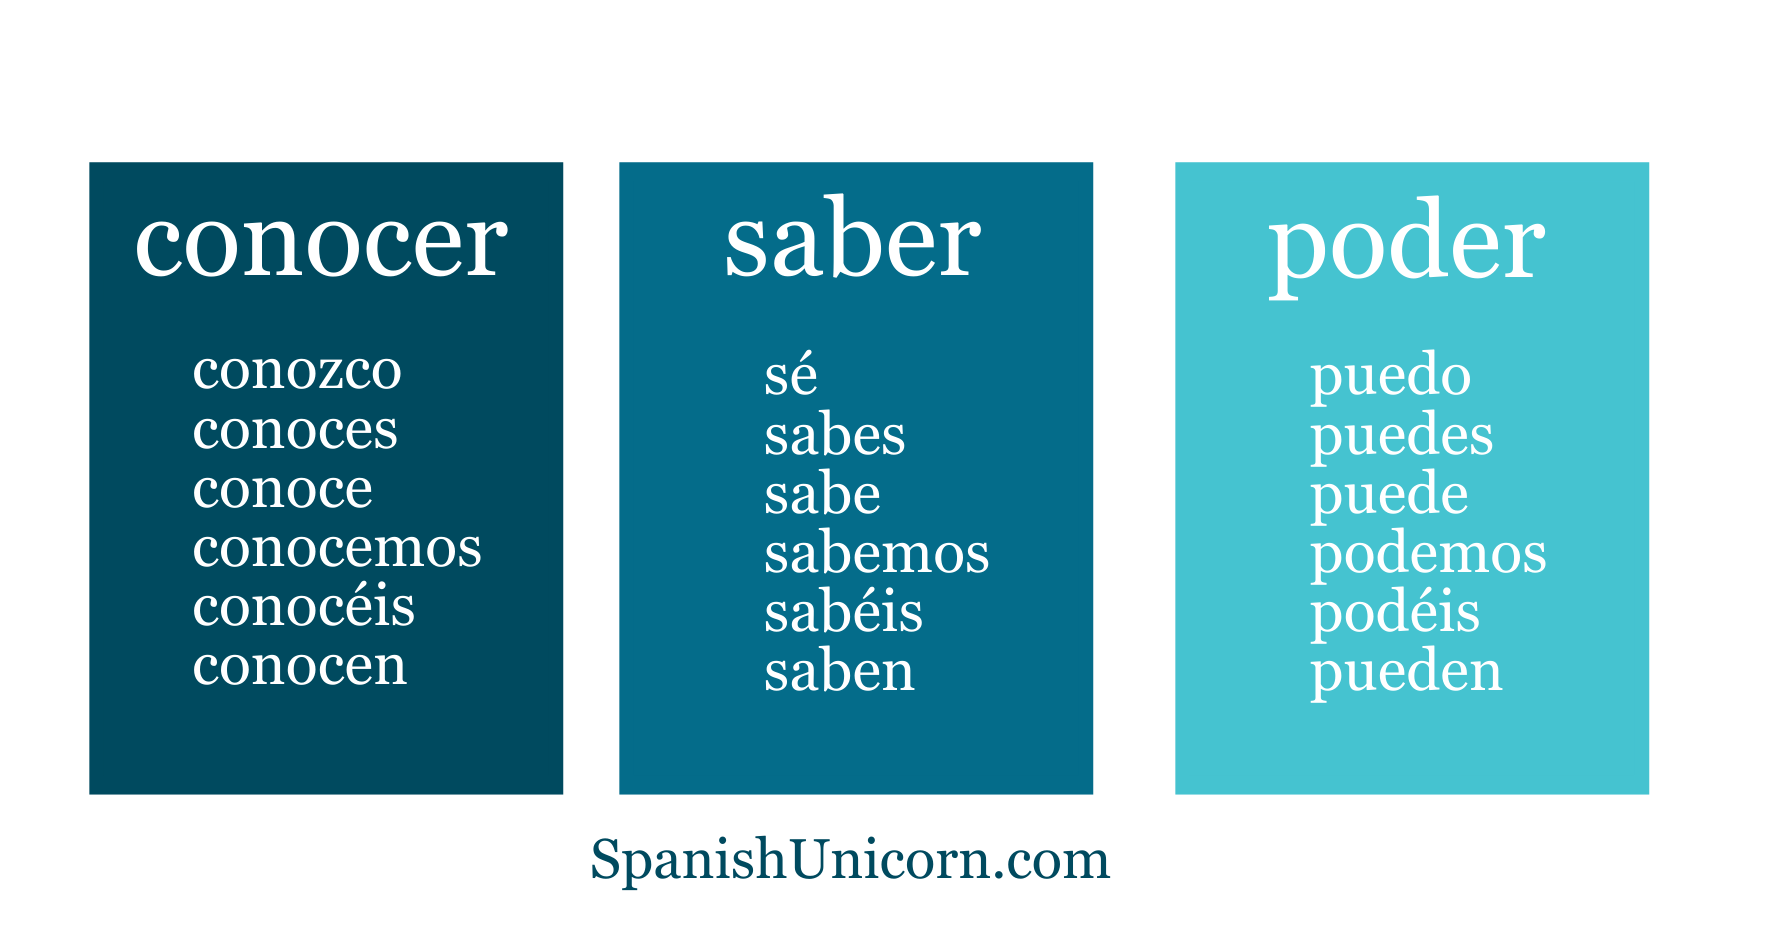 Saber meaning in preterite